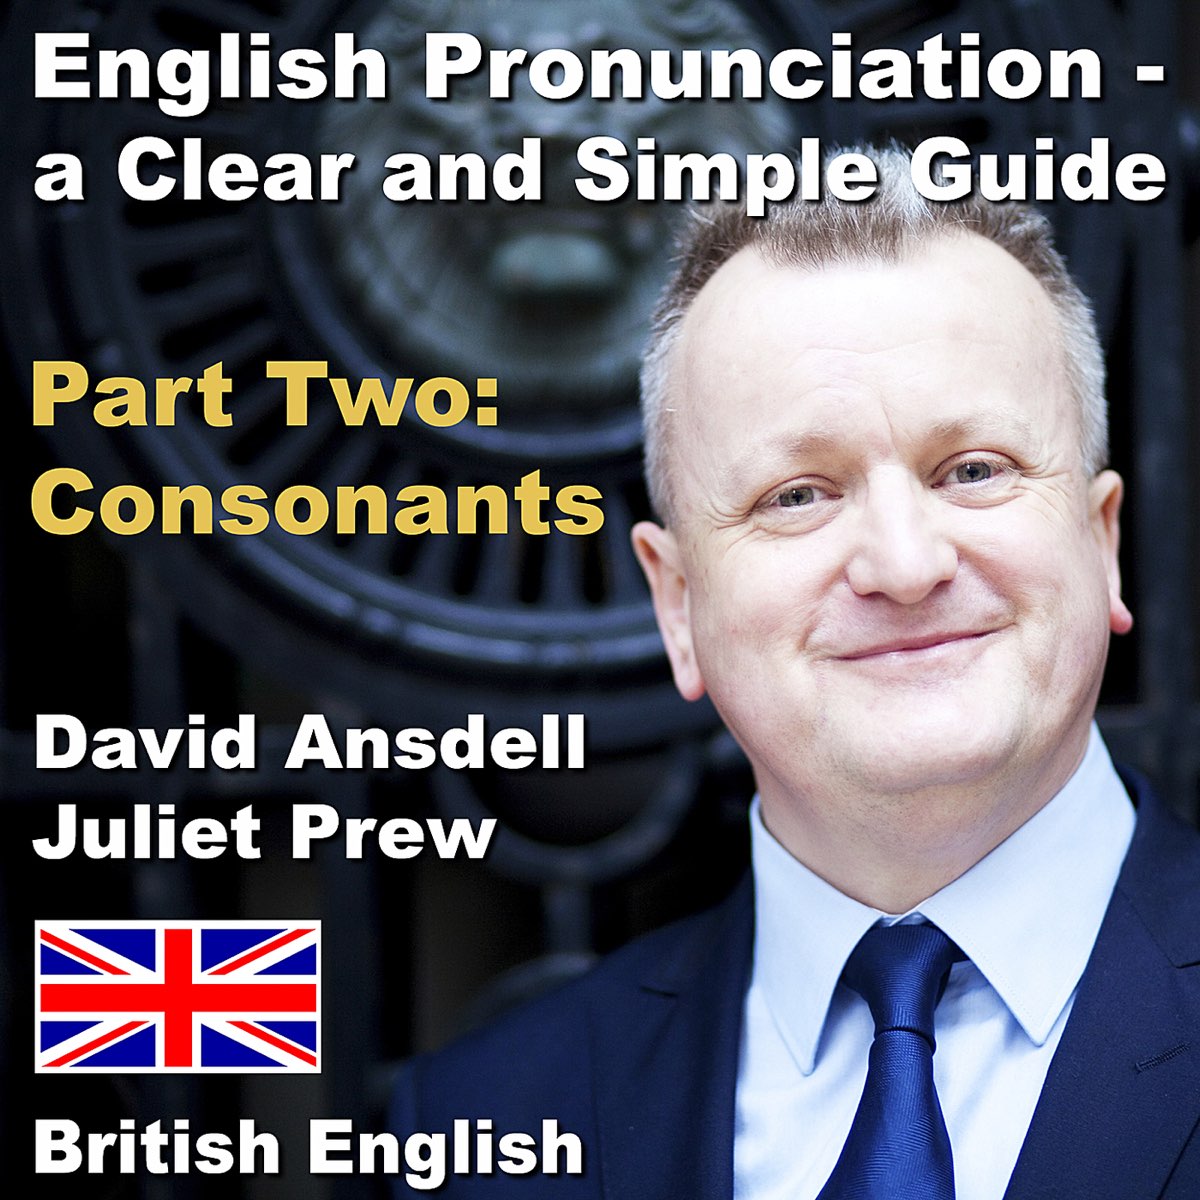 english-pronunciation-a-clear-and-simple-guide-part-two-consonants